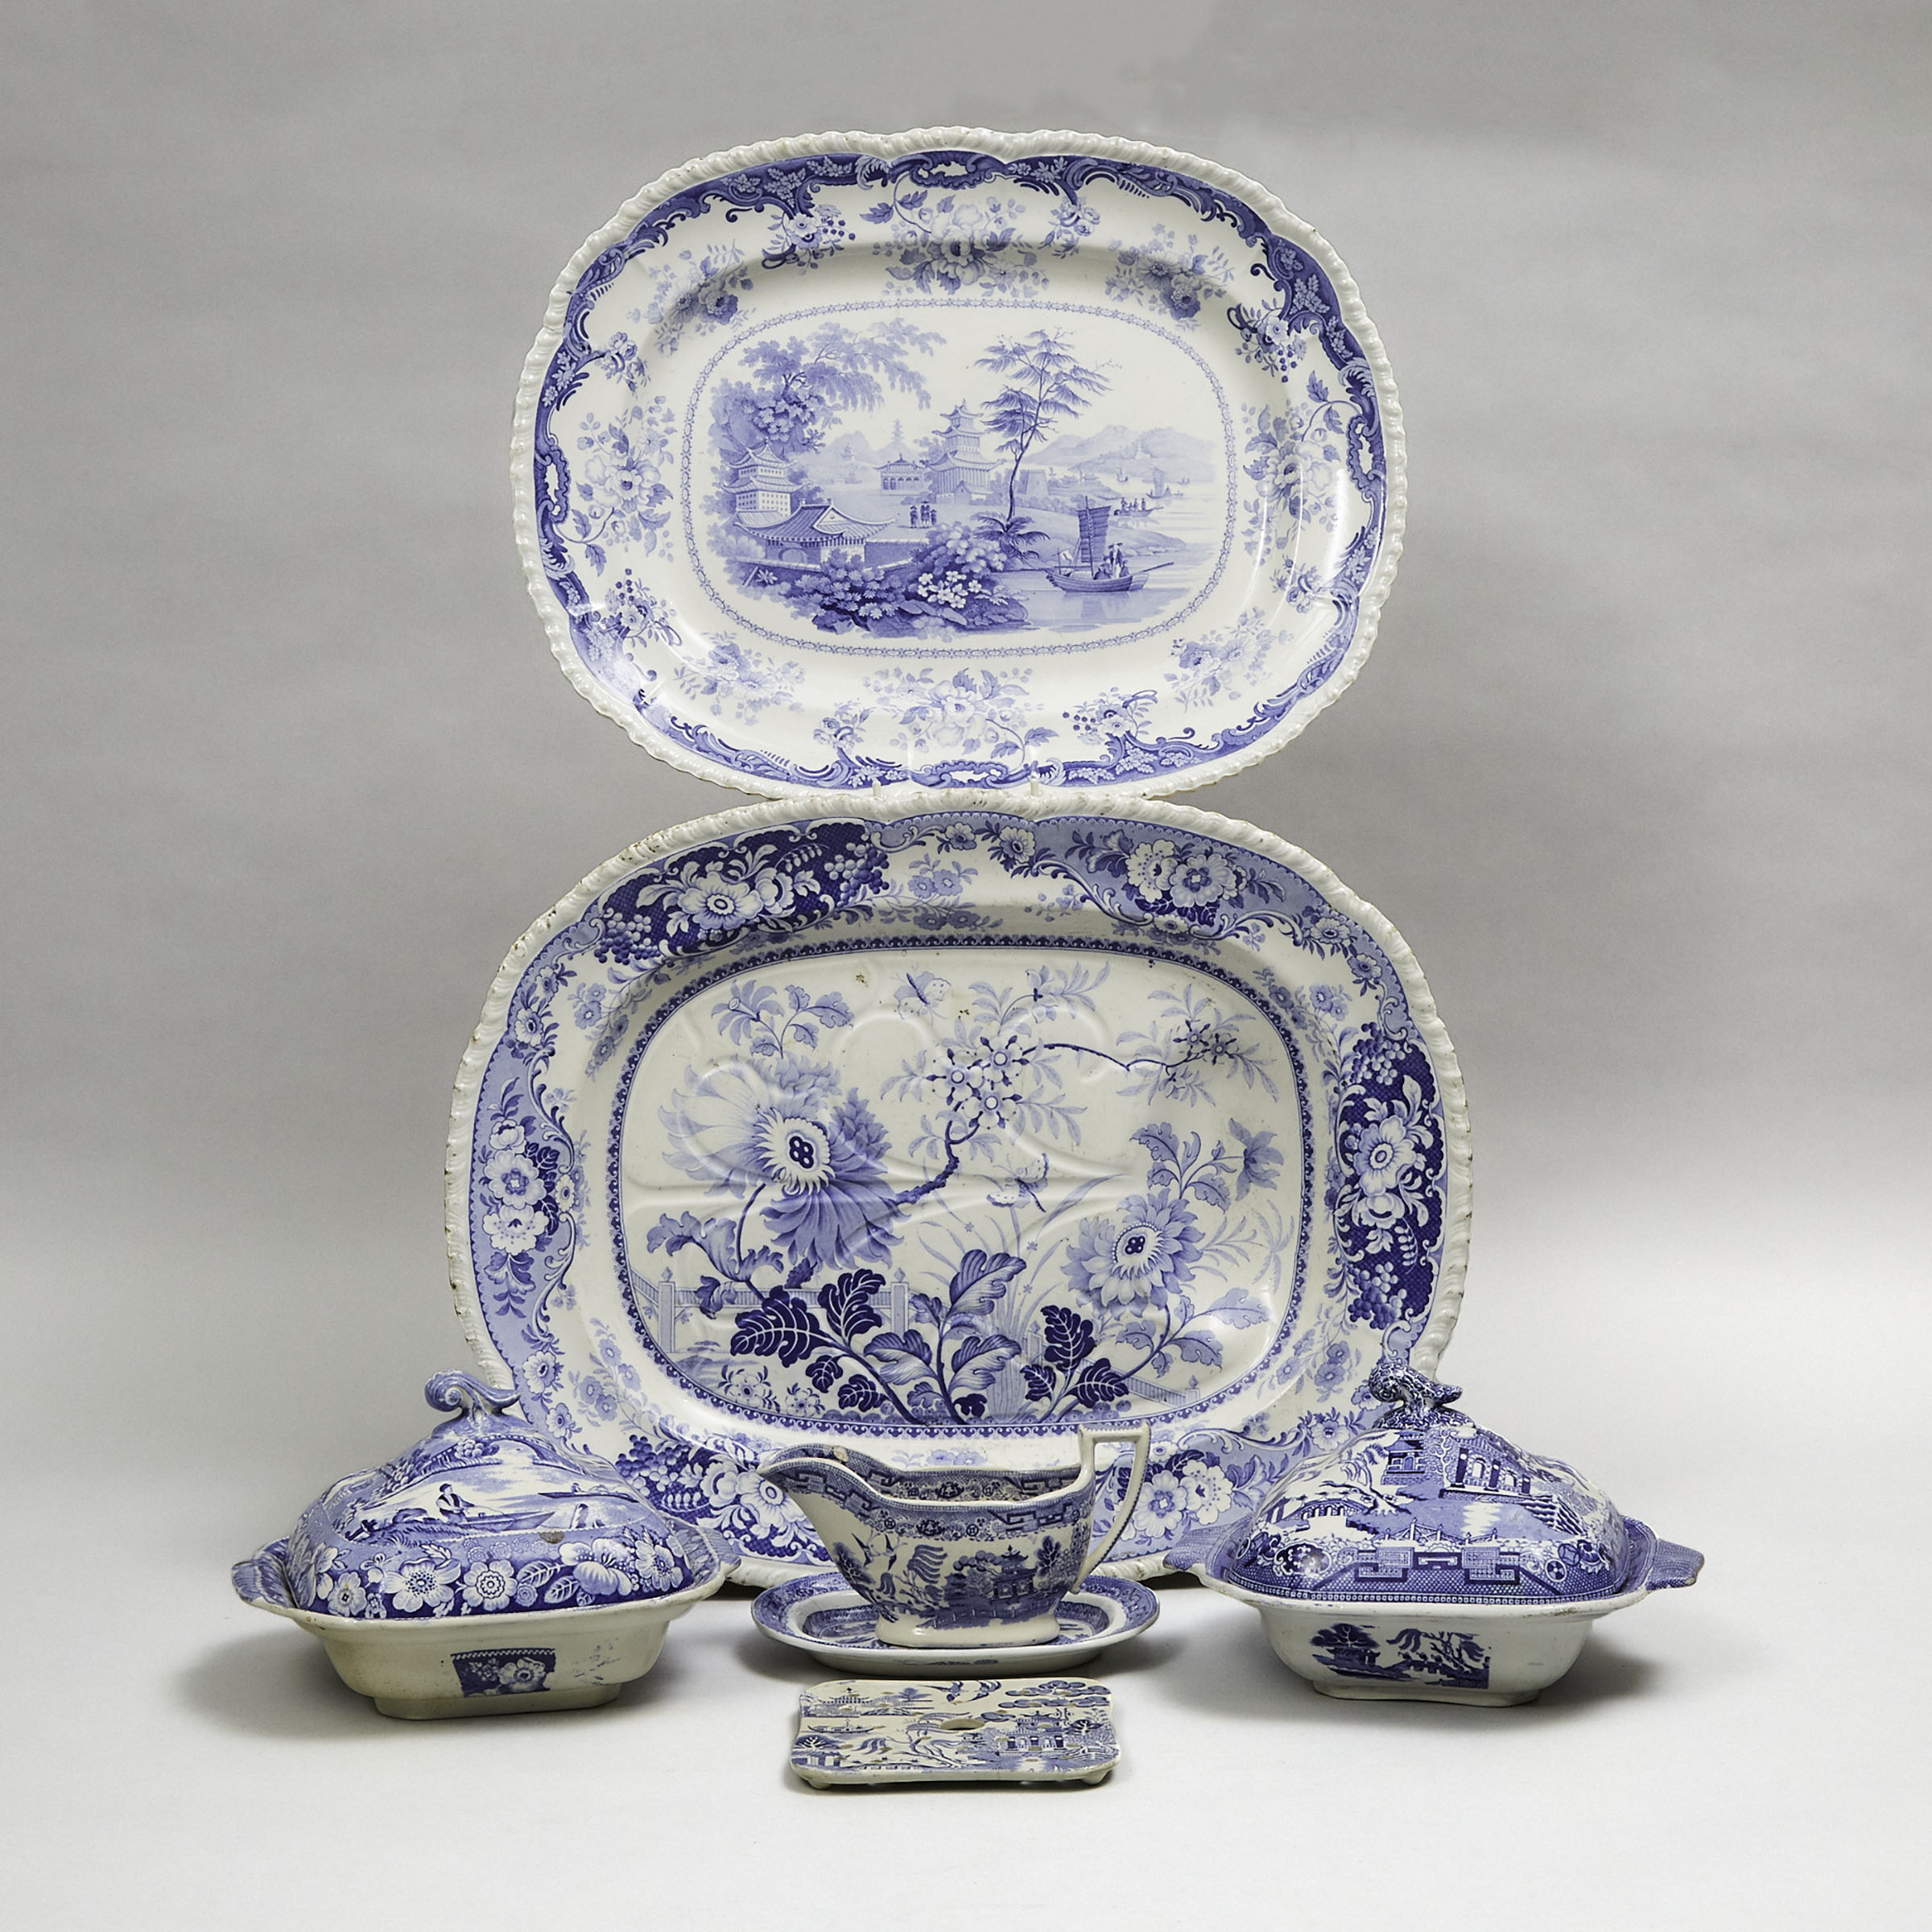 Two Staffordshire Blue-Printed  Oval Platters, Two Covered Dishes, Mazarine, Sauce Boat and a Small Platter, 19th century